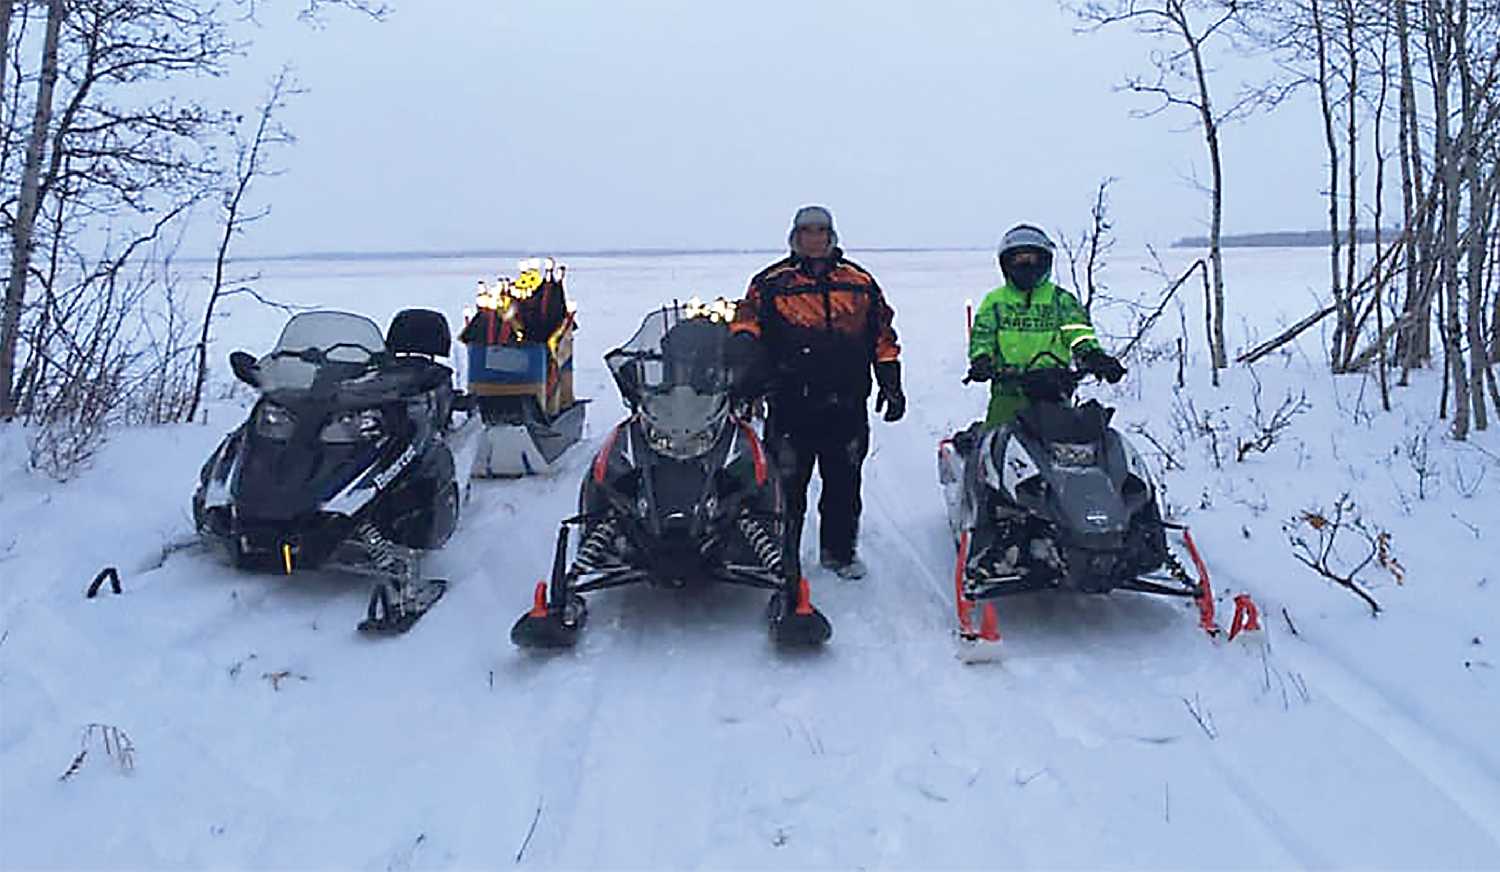 Snowmobiling through the Tri Valley Trails, Stan Langley and his grandson Gavin Palmer had the chance to enjoy the different paths within Southeast Saskatchewan and Southwest Manitoba. Along the trails, there are stations for individuals to fuel their snowmobiles or warm up at a shack.